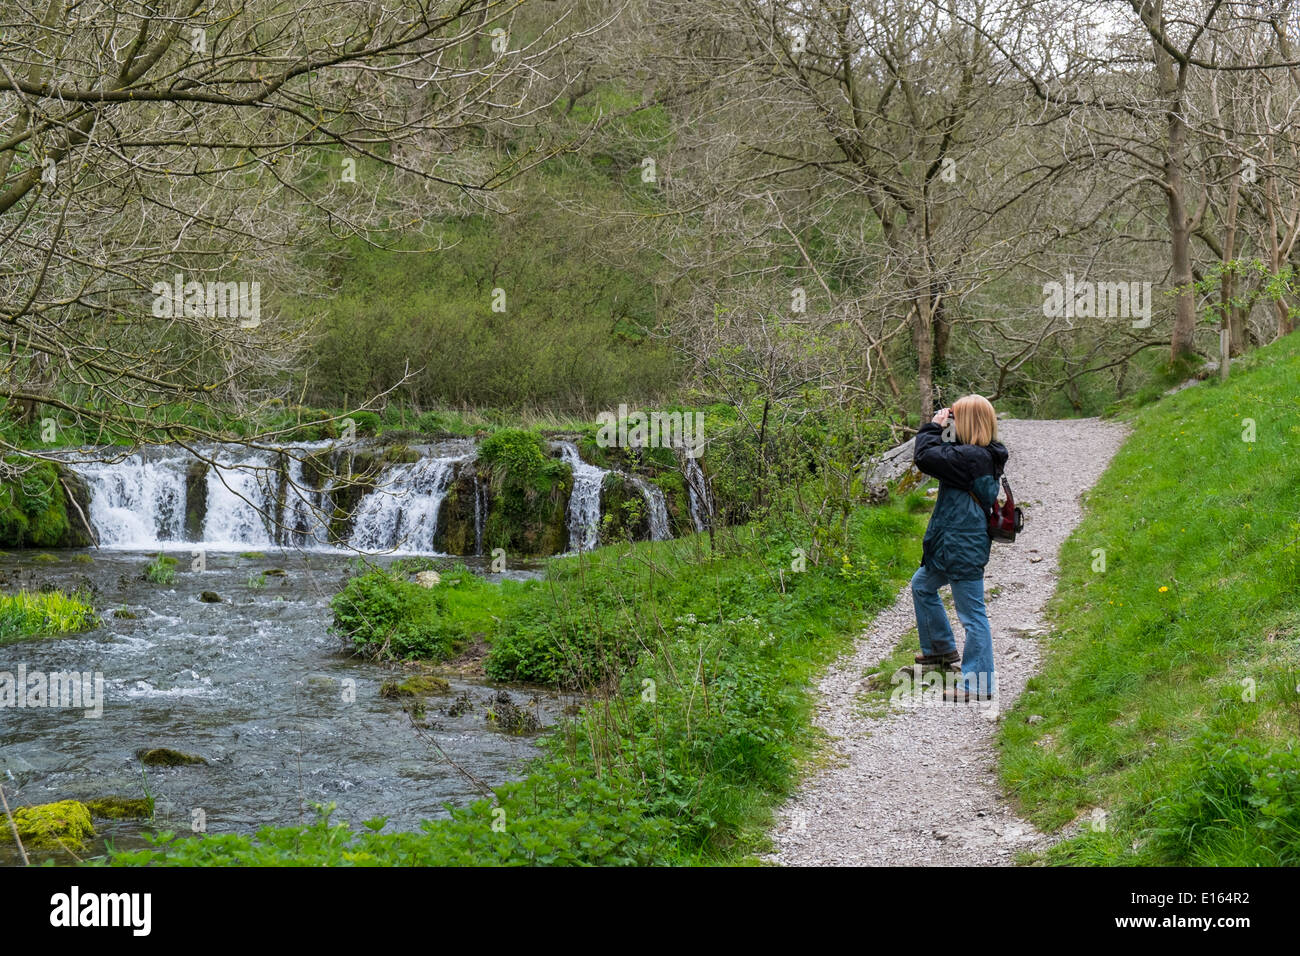 Woman birdwatcher on the River Lathkill, Lathkill dale, Peak District National Park, Derbyshire, England, May Stock Photo